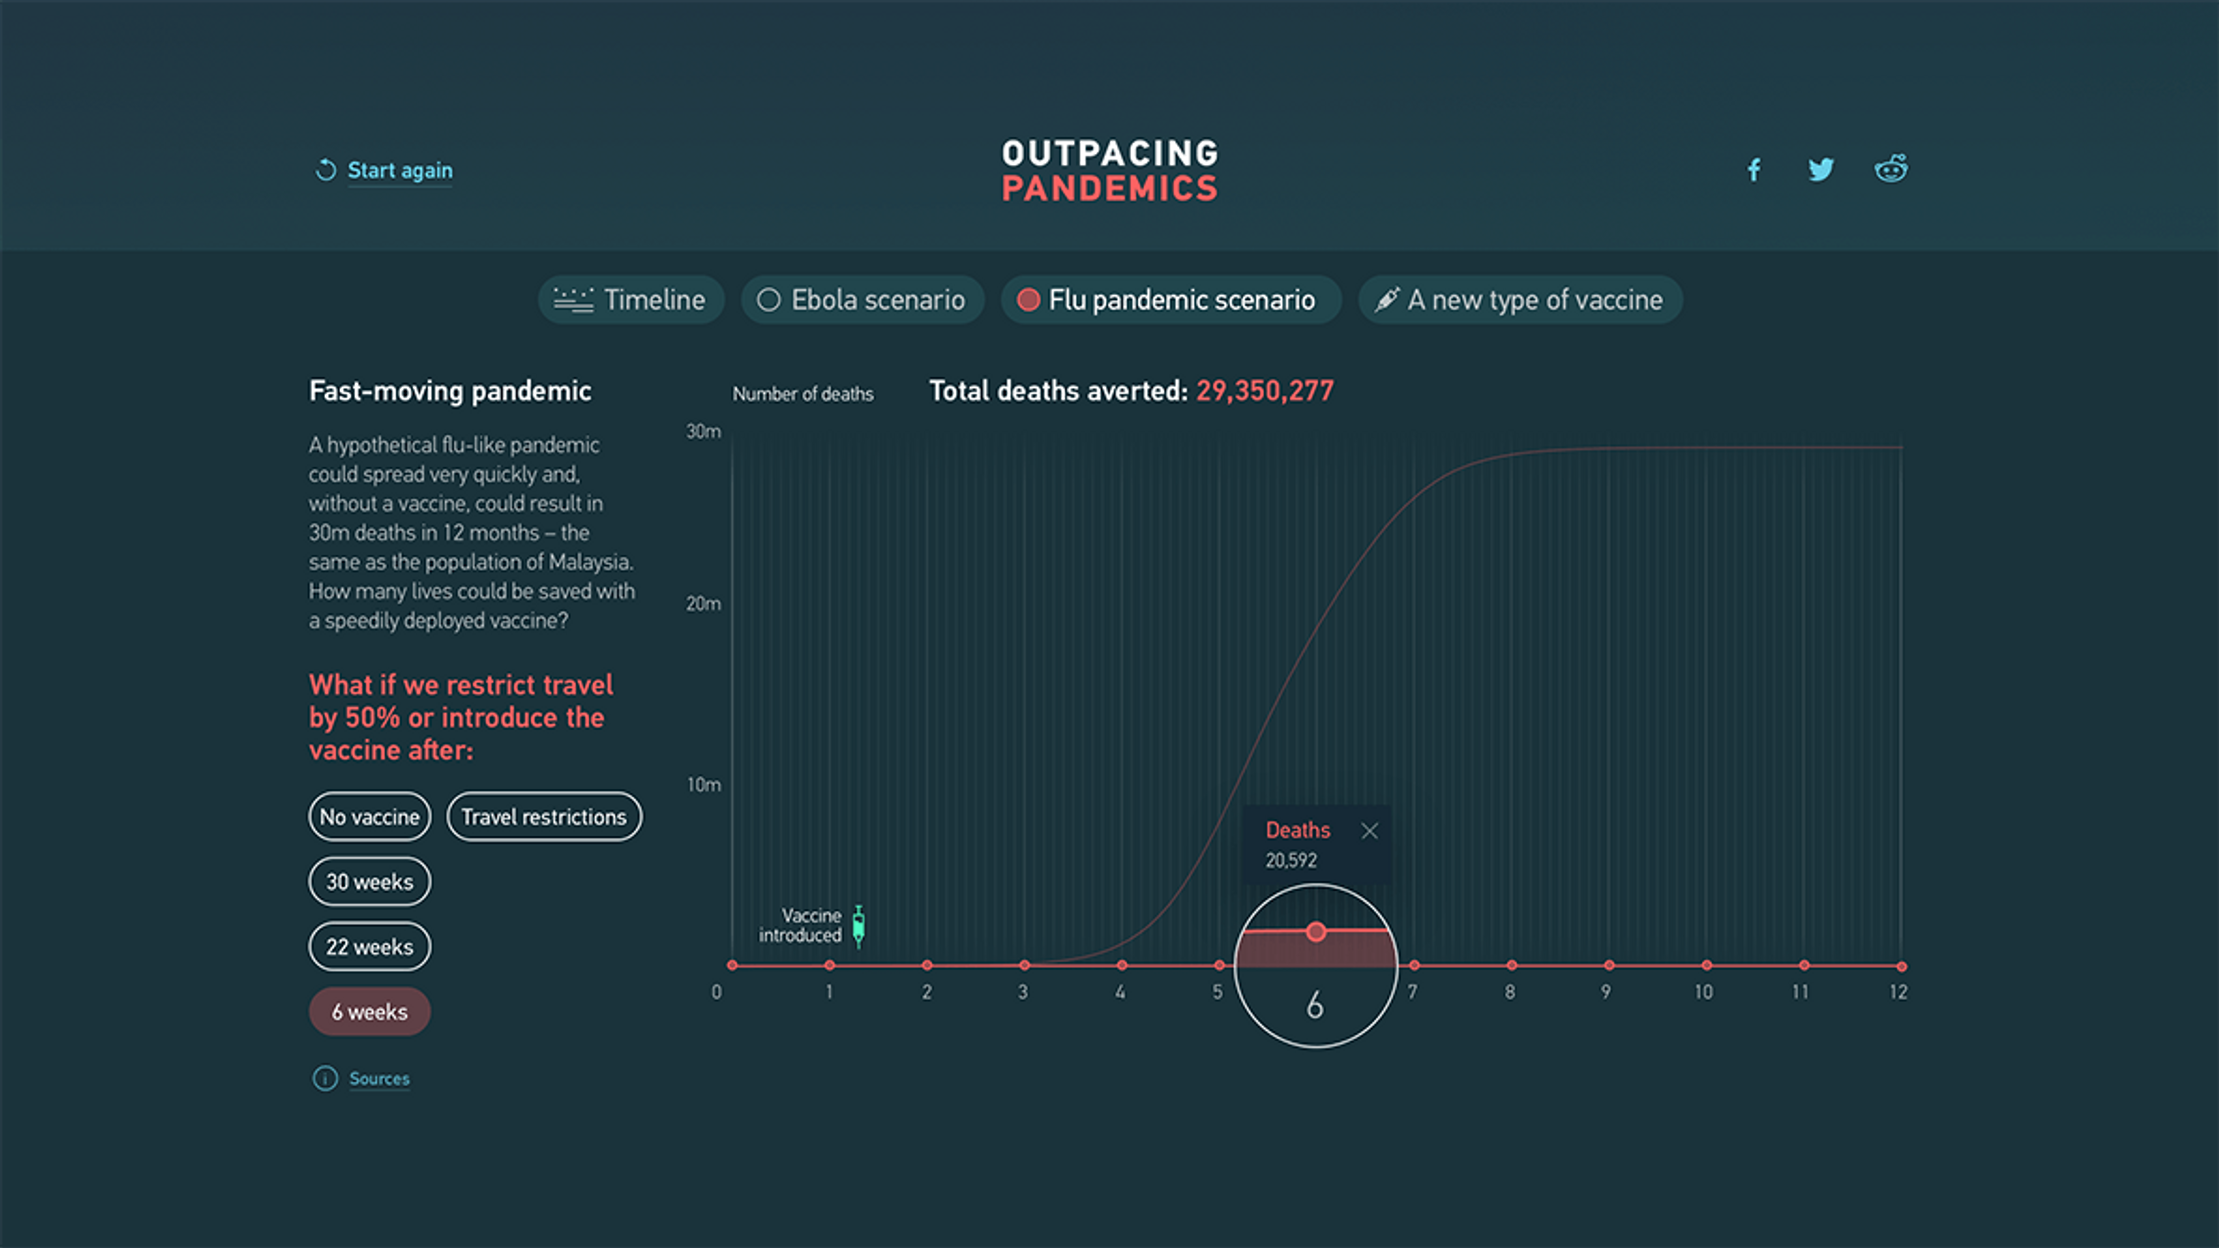 A line chart visualizing deaths for a hypothetical flu-like pandemic over 12 months. By default it shows deaths with no vaccine, but interactive buttons show how deaths would be reduced with travel restrictions or different wait times on working vaccines.